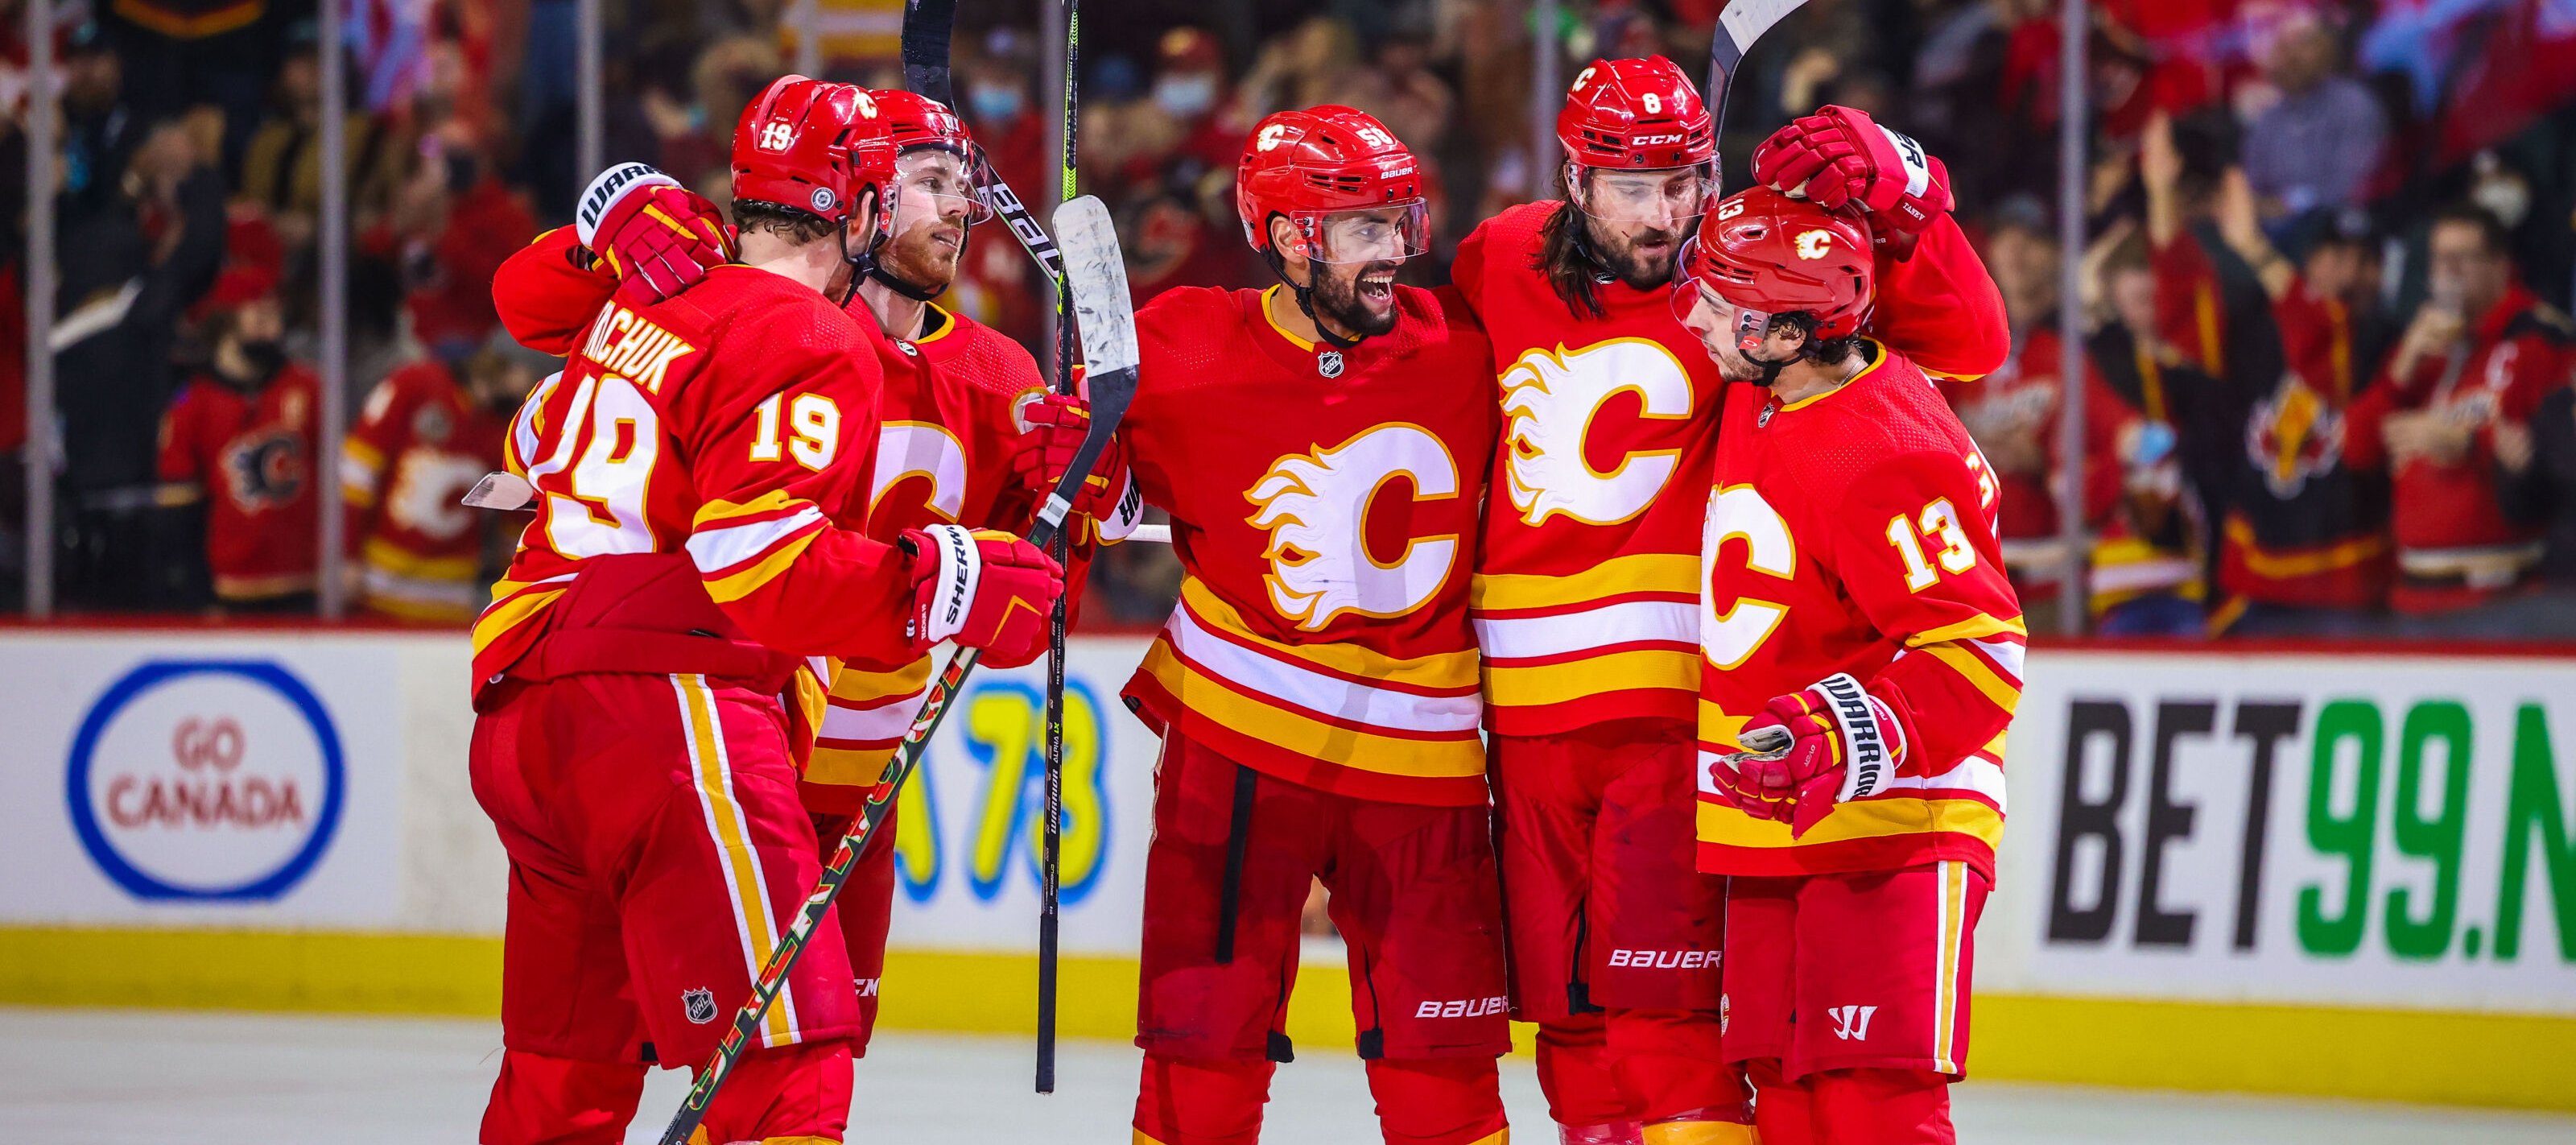 Calgary vs Edmonton, Game 4 Stanley Cup Playoffs Expert Analysis & Betting Odds